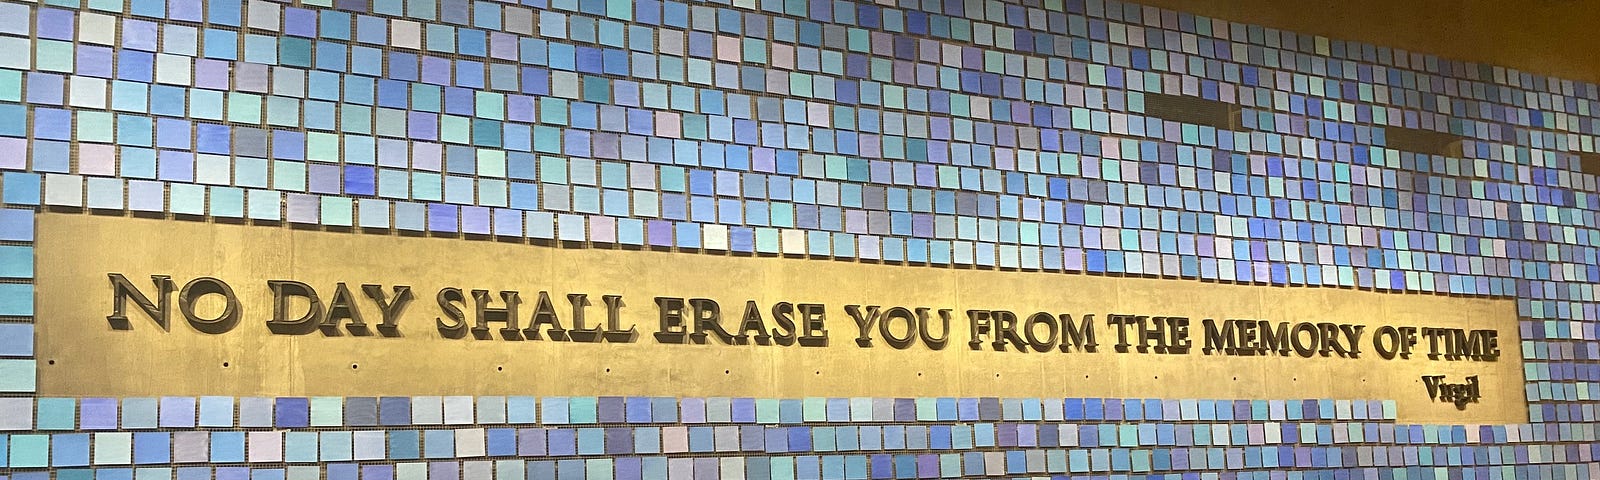 No Day Shall Erase You From the Memory of Time installation at the 9/11 Memorial